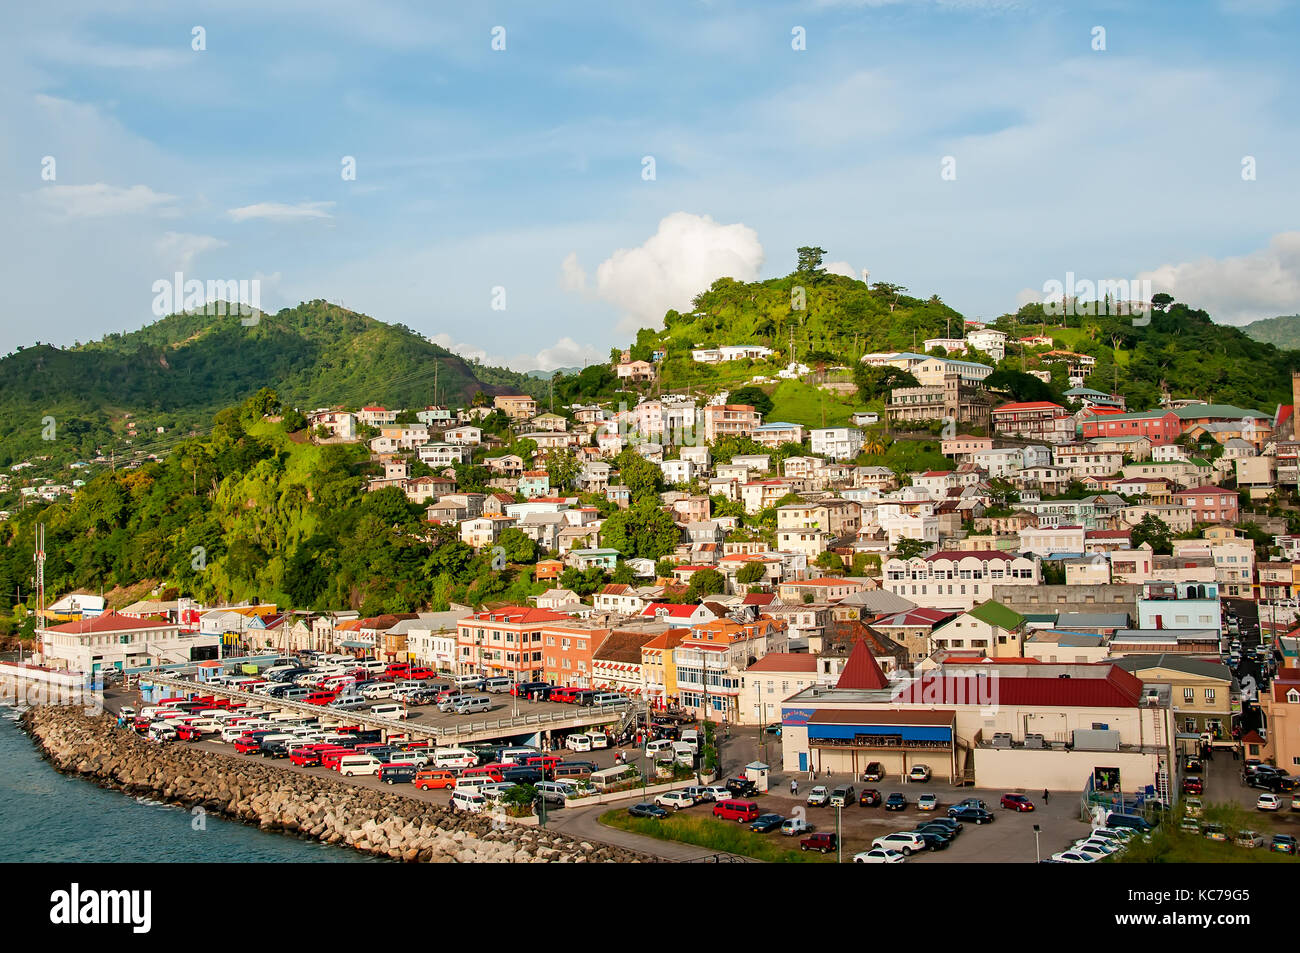 Above looking down on Melville Street near St. George's cruise terminal Grenada, Stock Photo